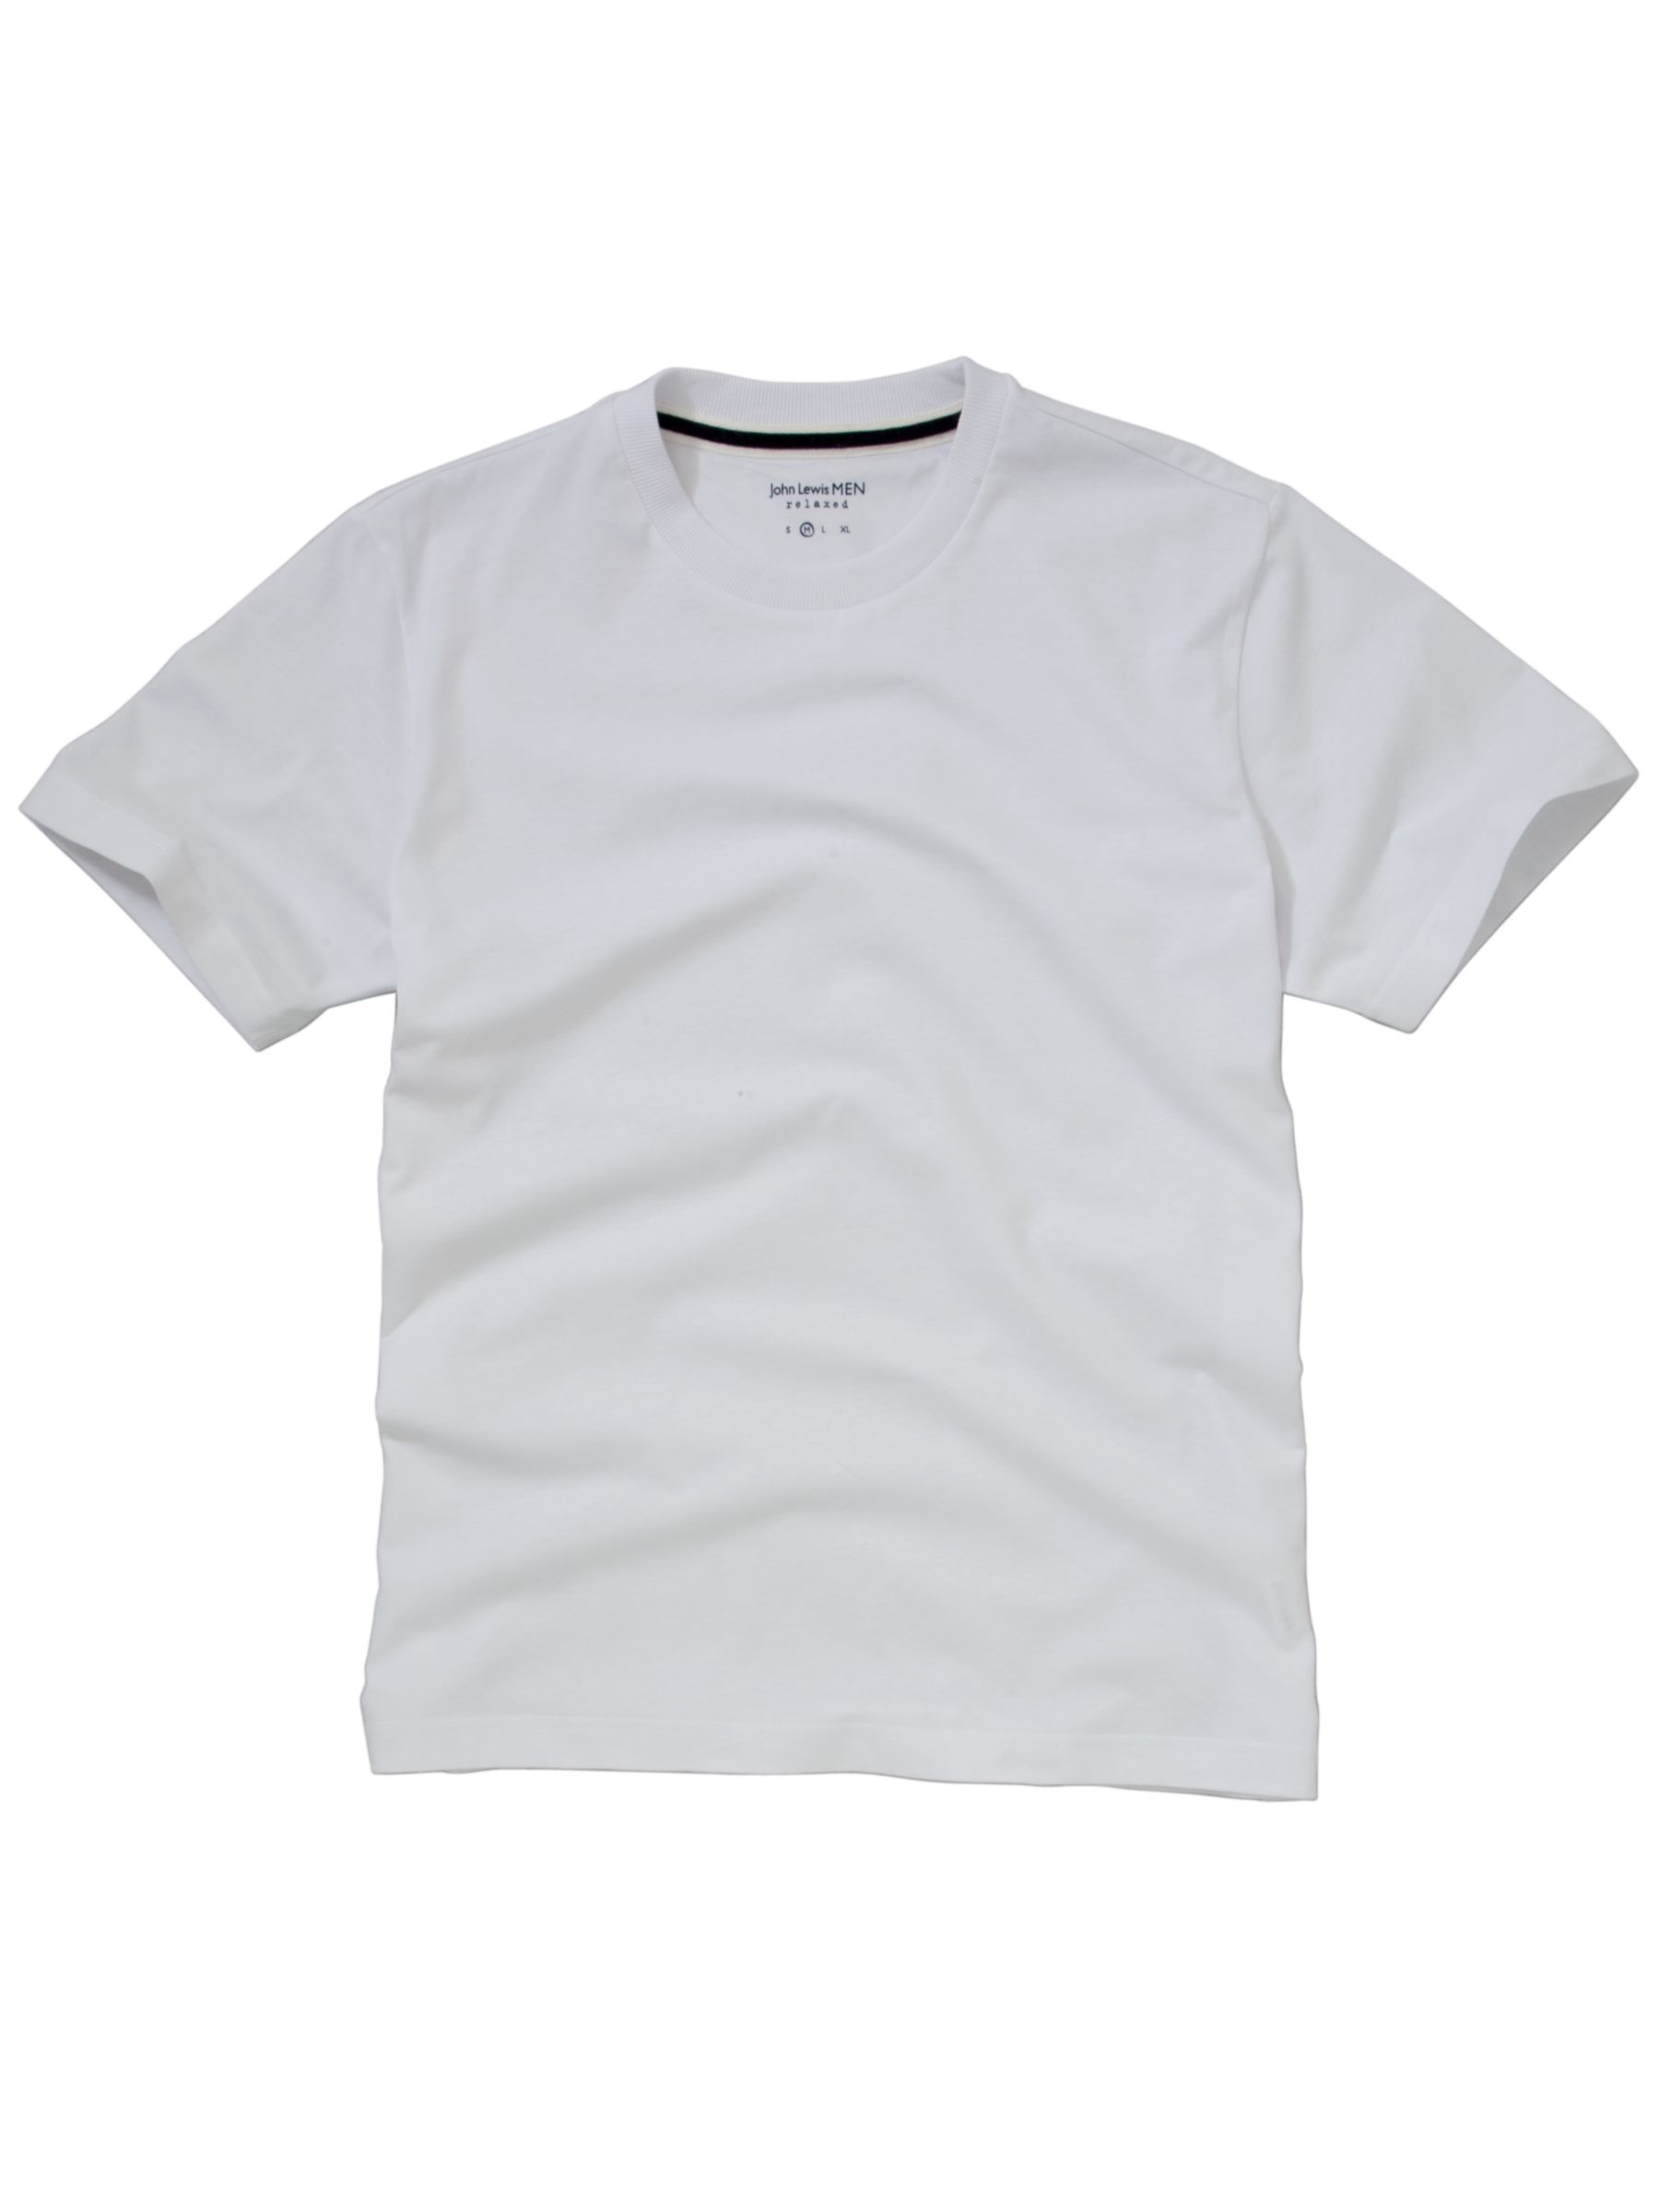 Sueded Cotton Loungewear T-Shirt, White